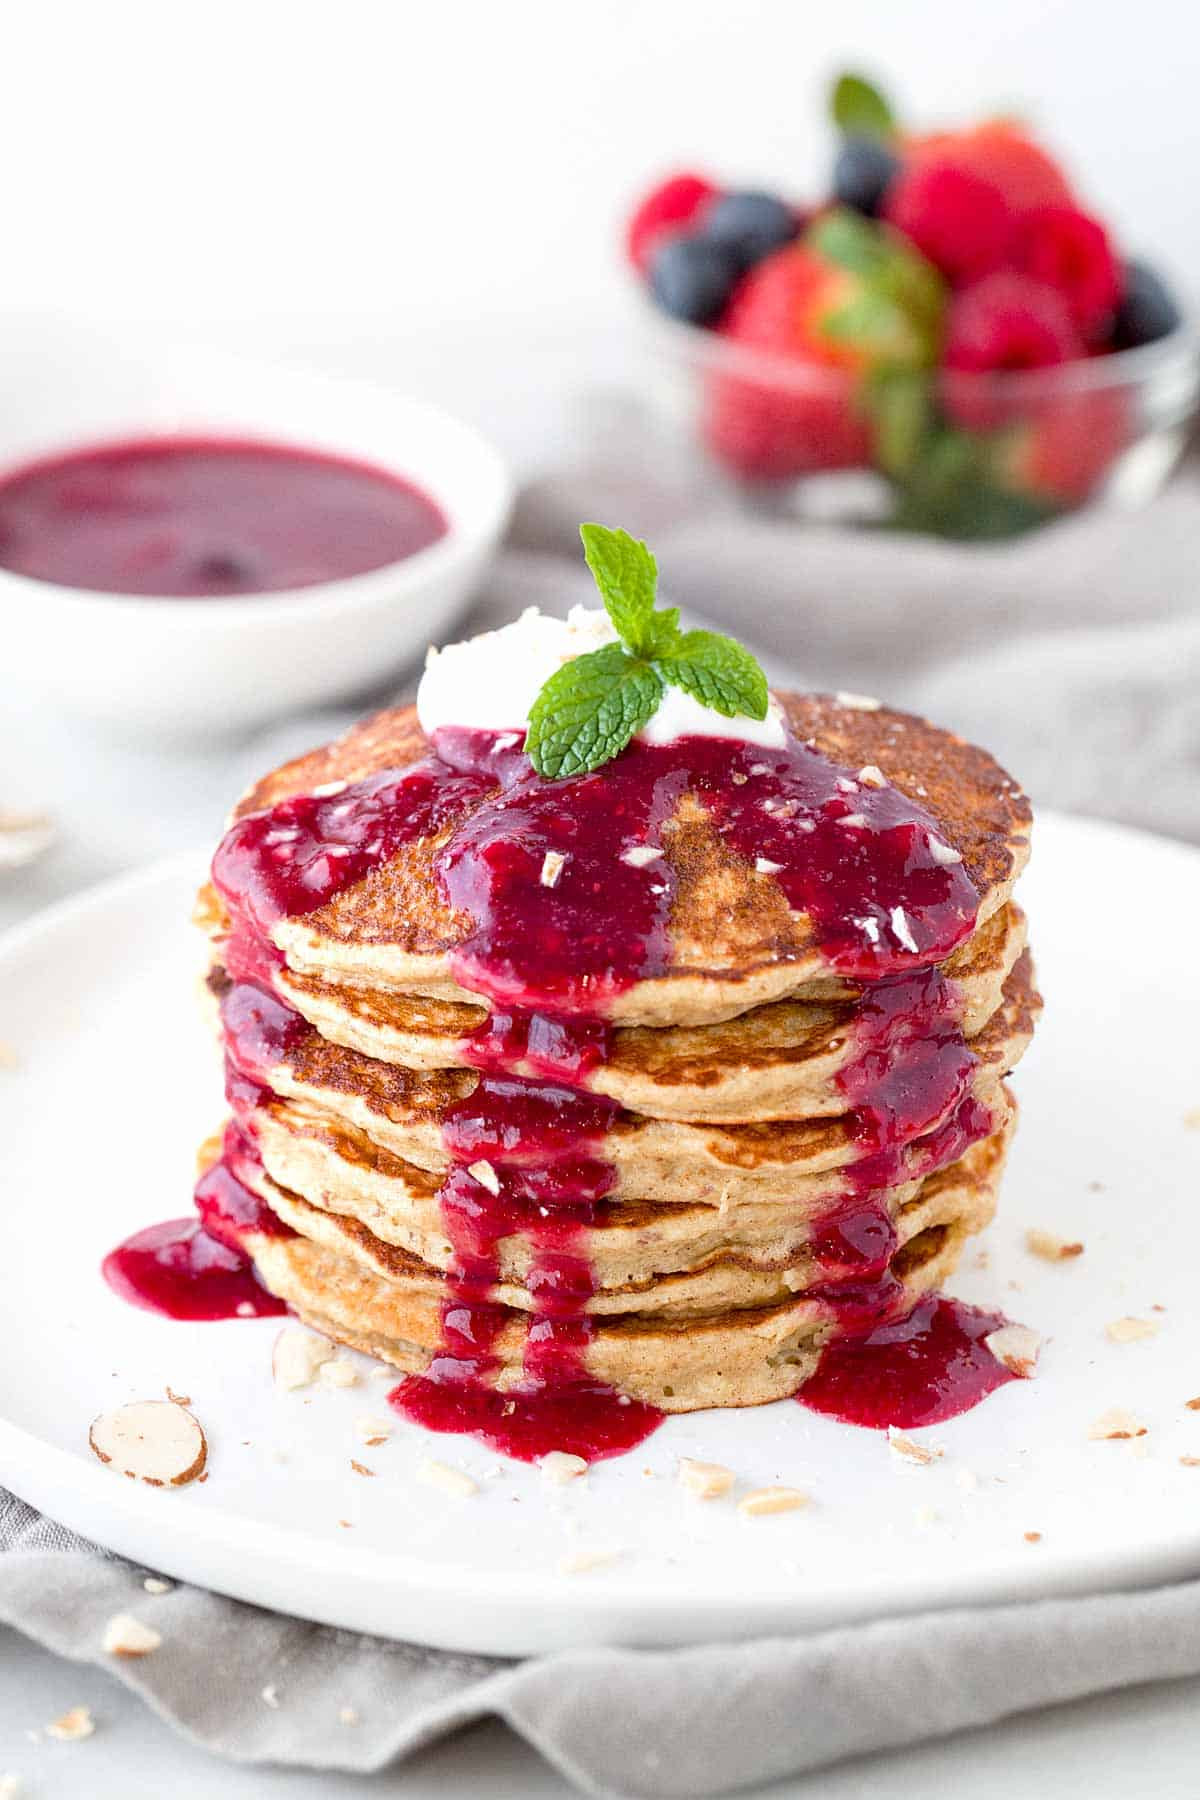 Oat Pancakes Healthy
 Healthy Oat Pancakes with Berry Sauce